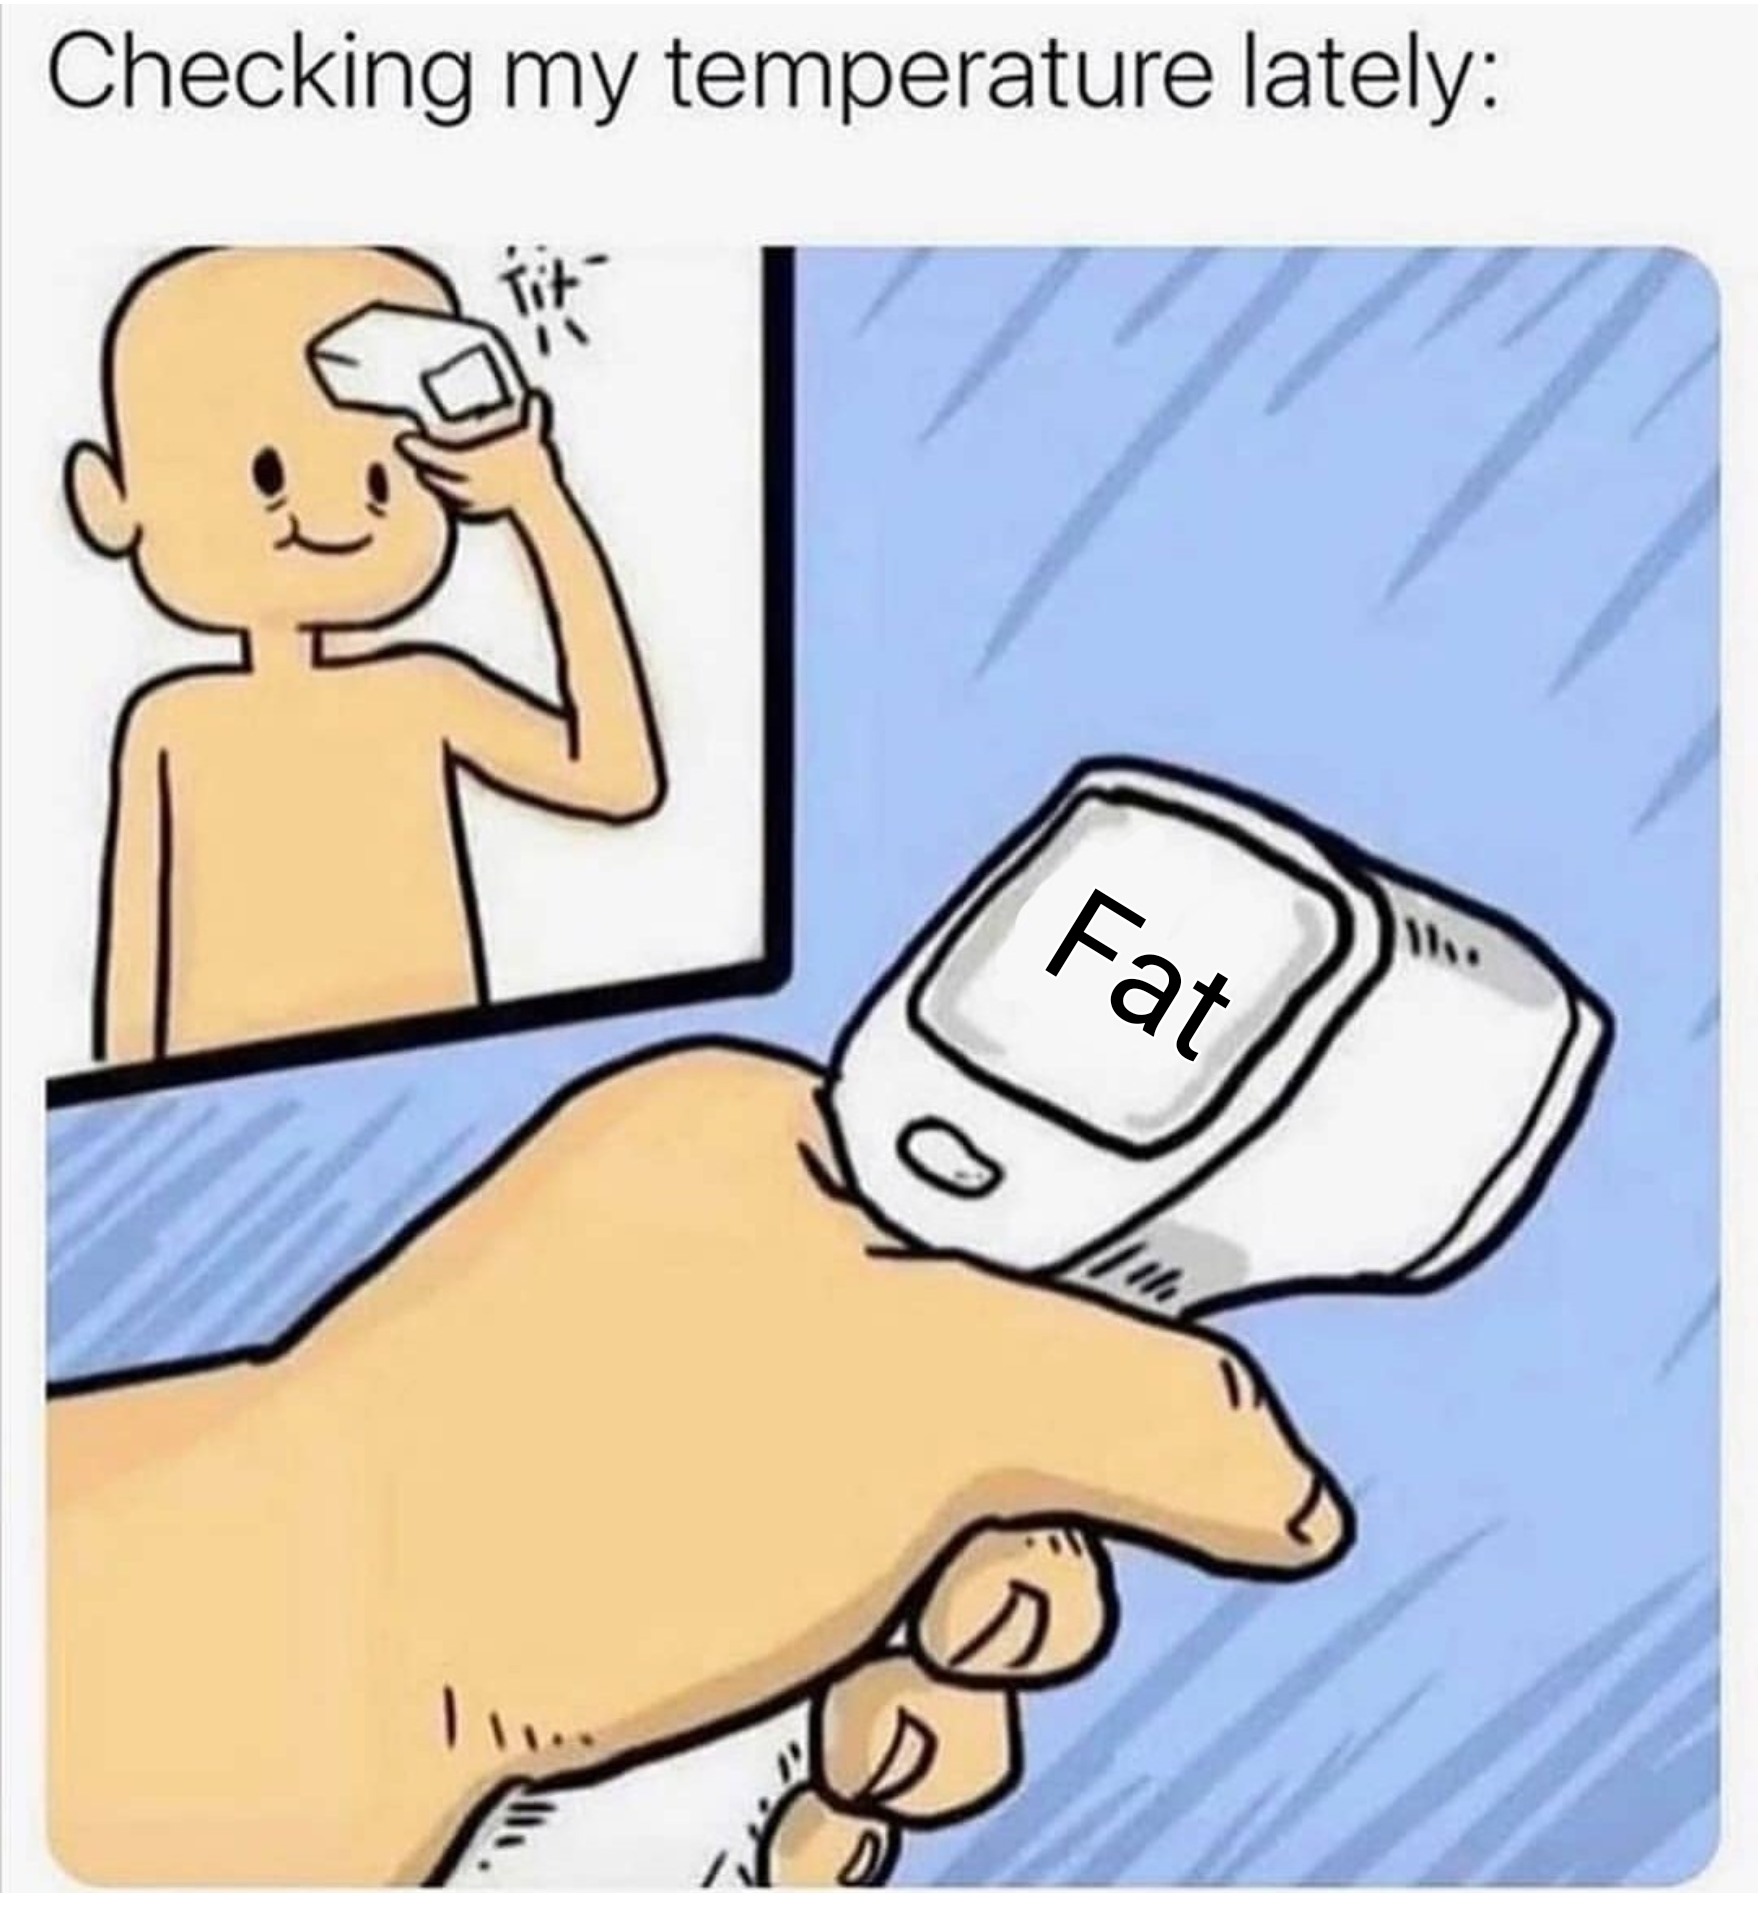 essential worker meme - Checking my temperature lately fit Fat